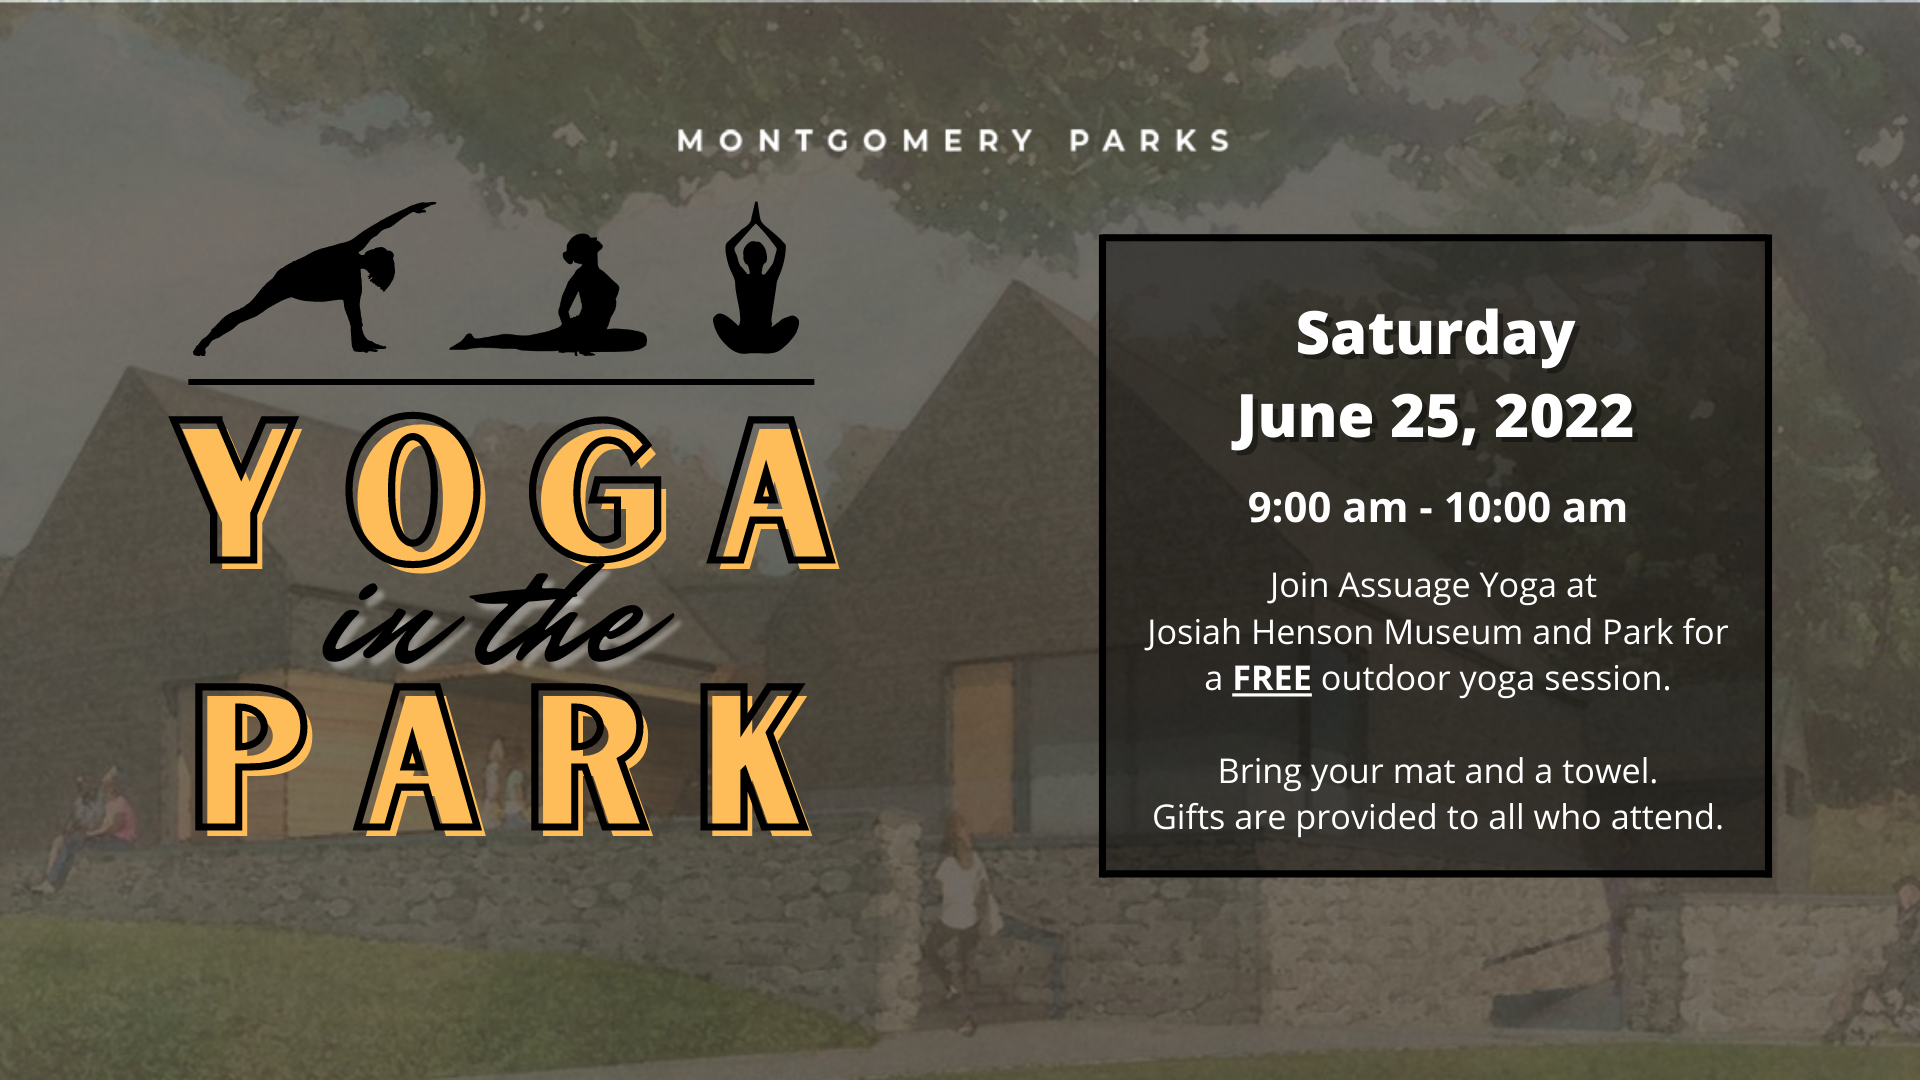 Montgomery Parks - Yoga in the Park Graphic - Saturday June 25, 2022. 9 am to 10 am. Join Assuage Yoga.